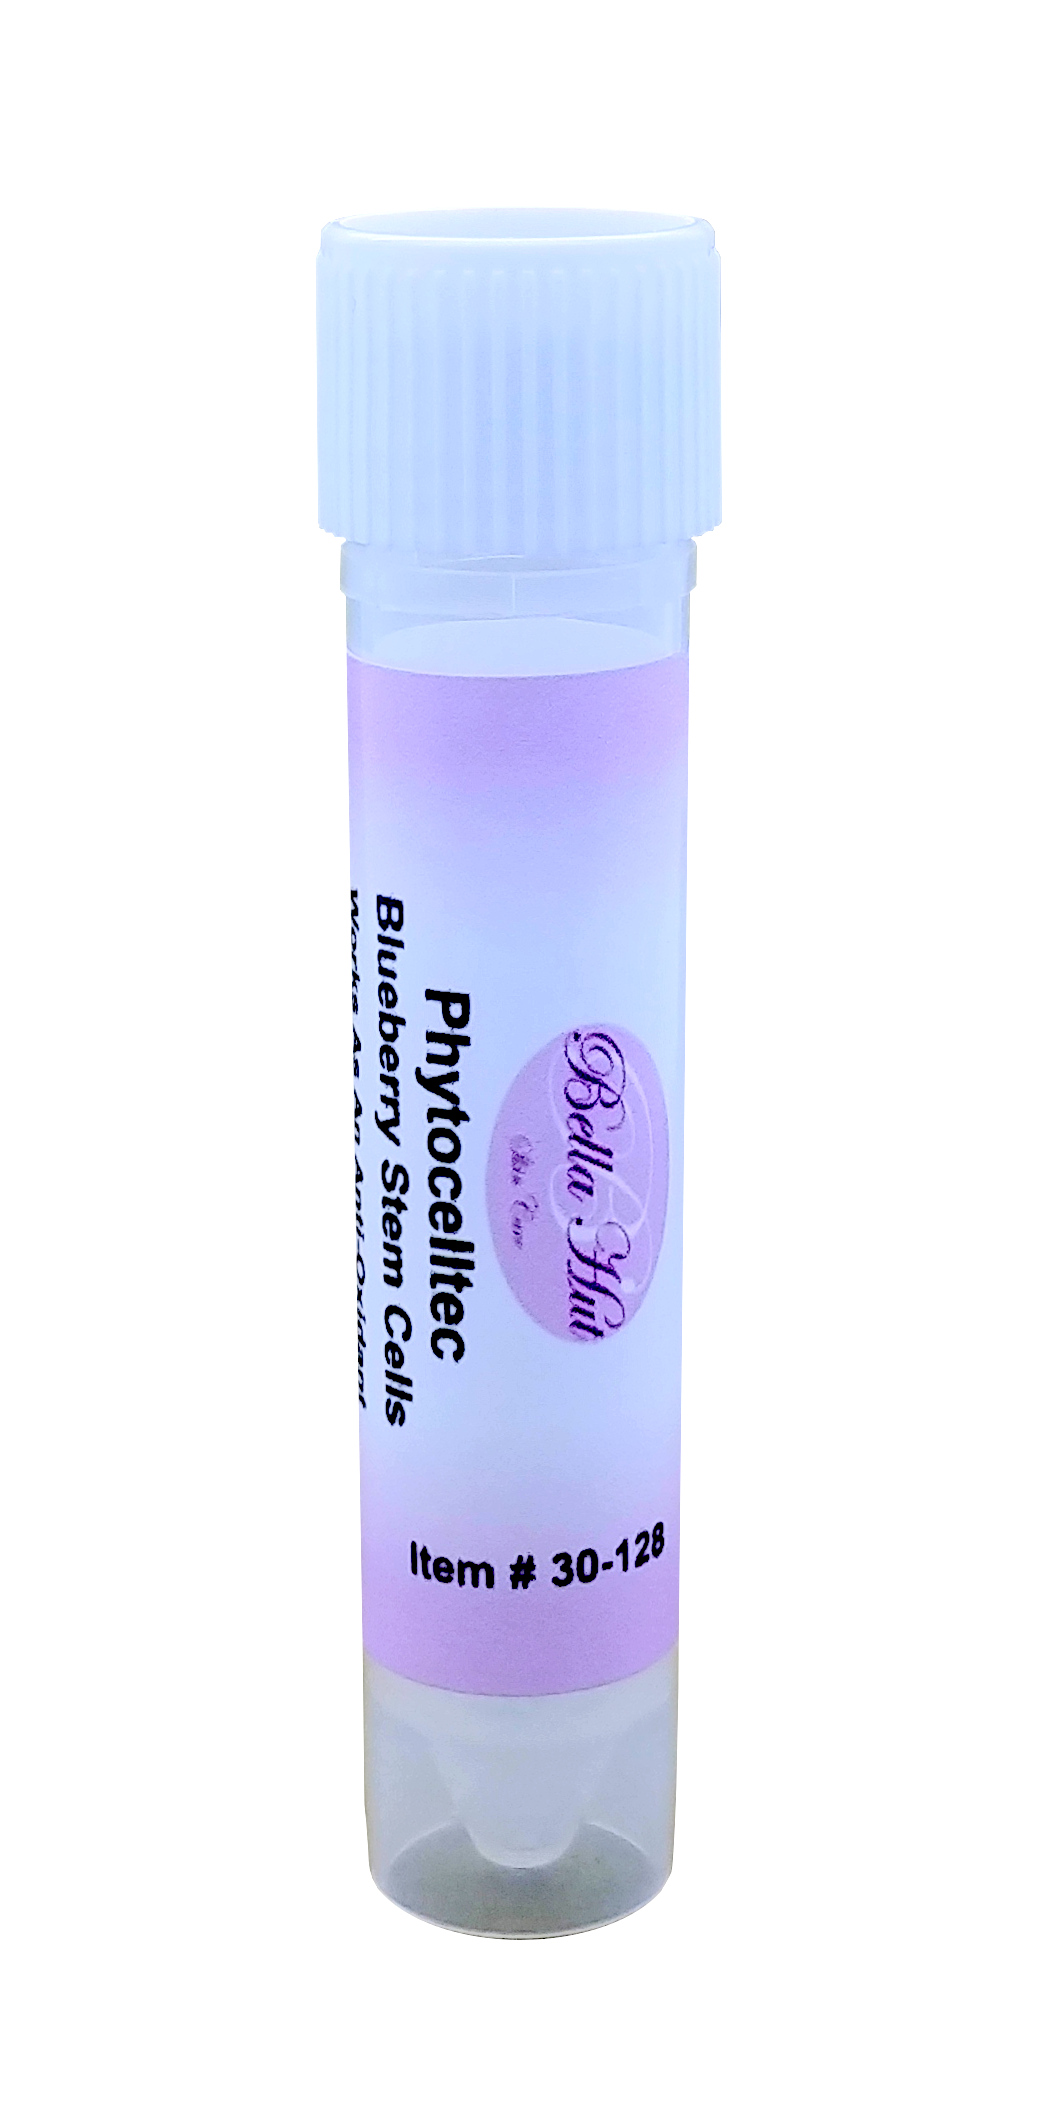 Pure PhytoCellTec Blueberry Stem Cells peptide additive for mixing cream or serum